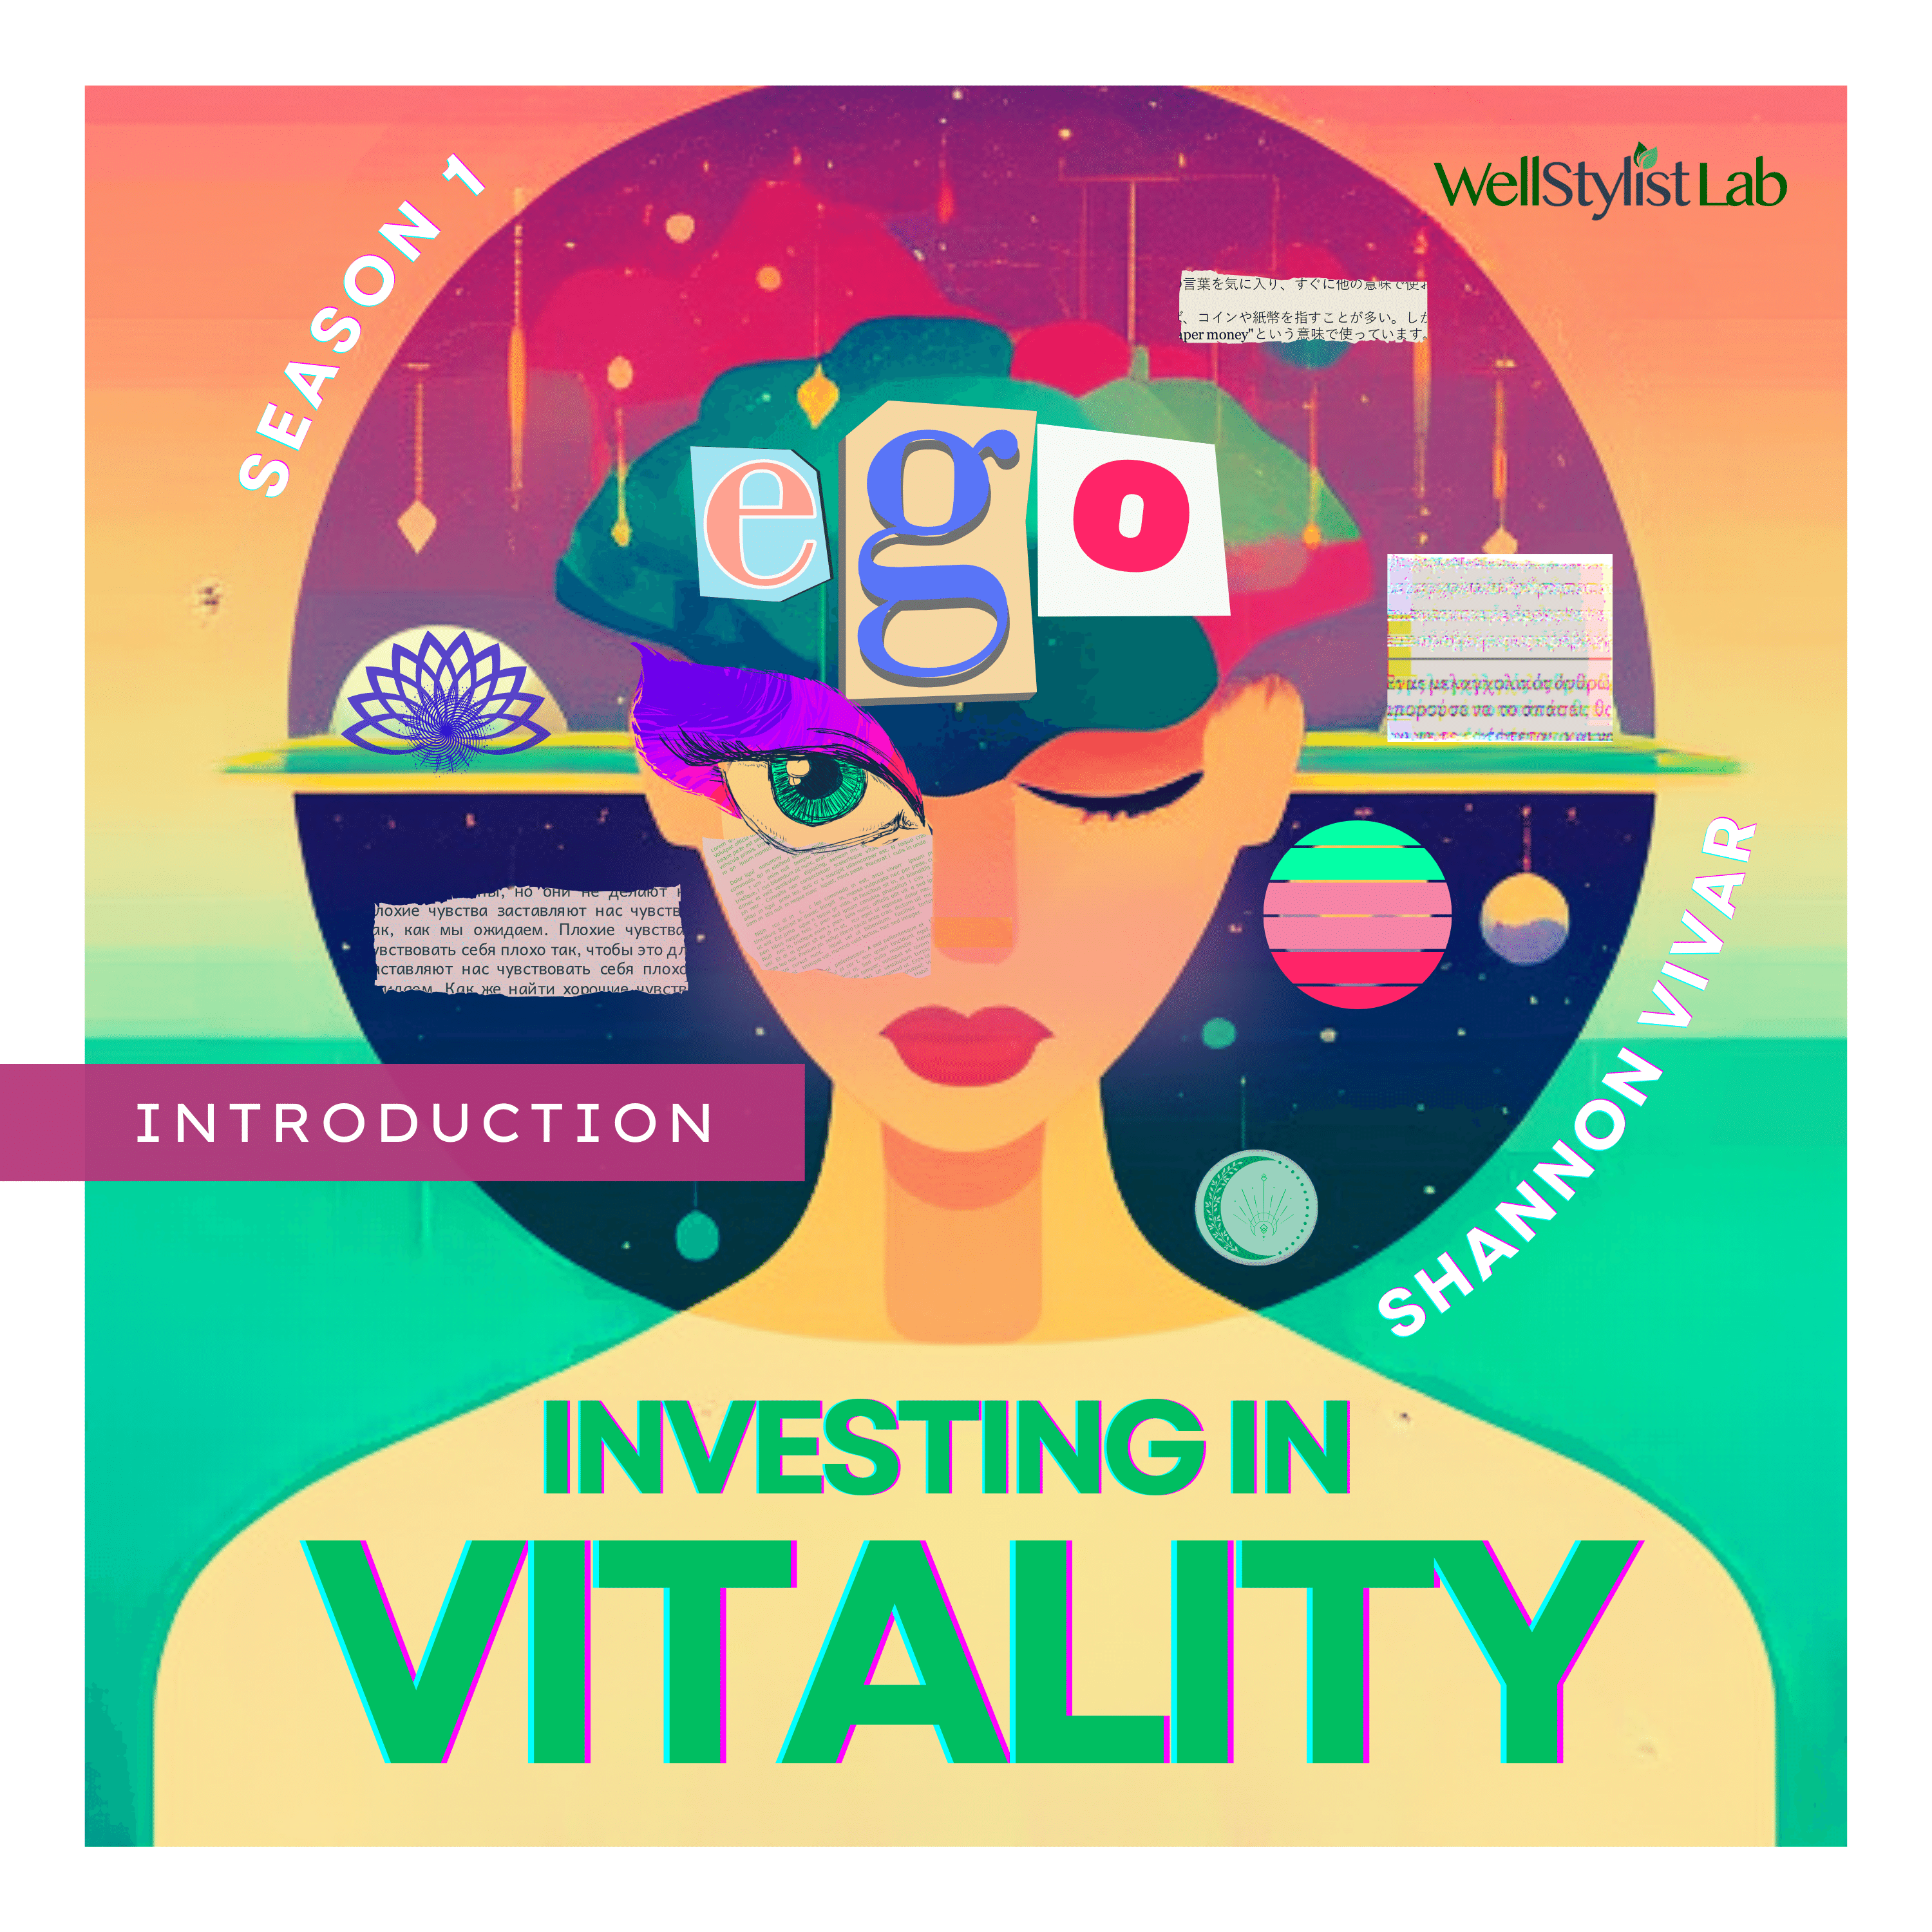 Introduction to Vitality Investing